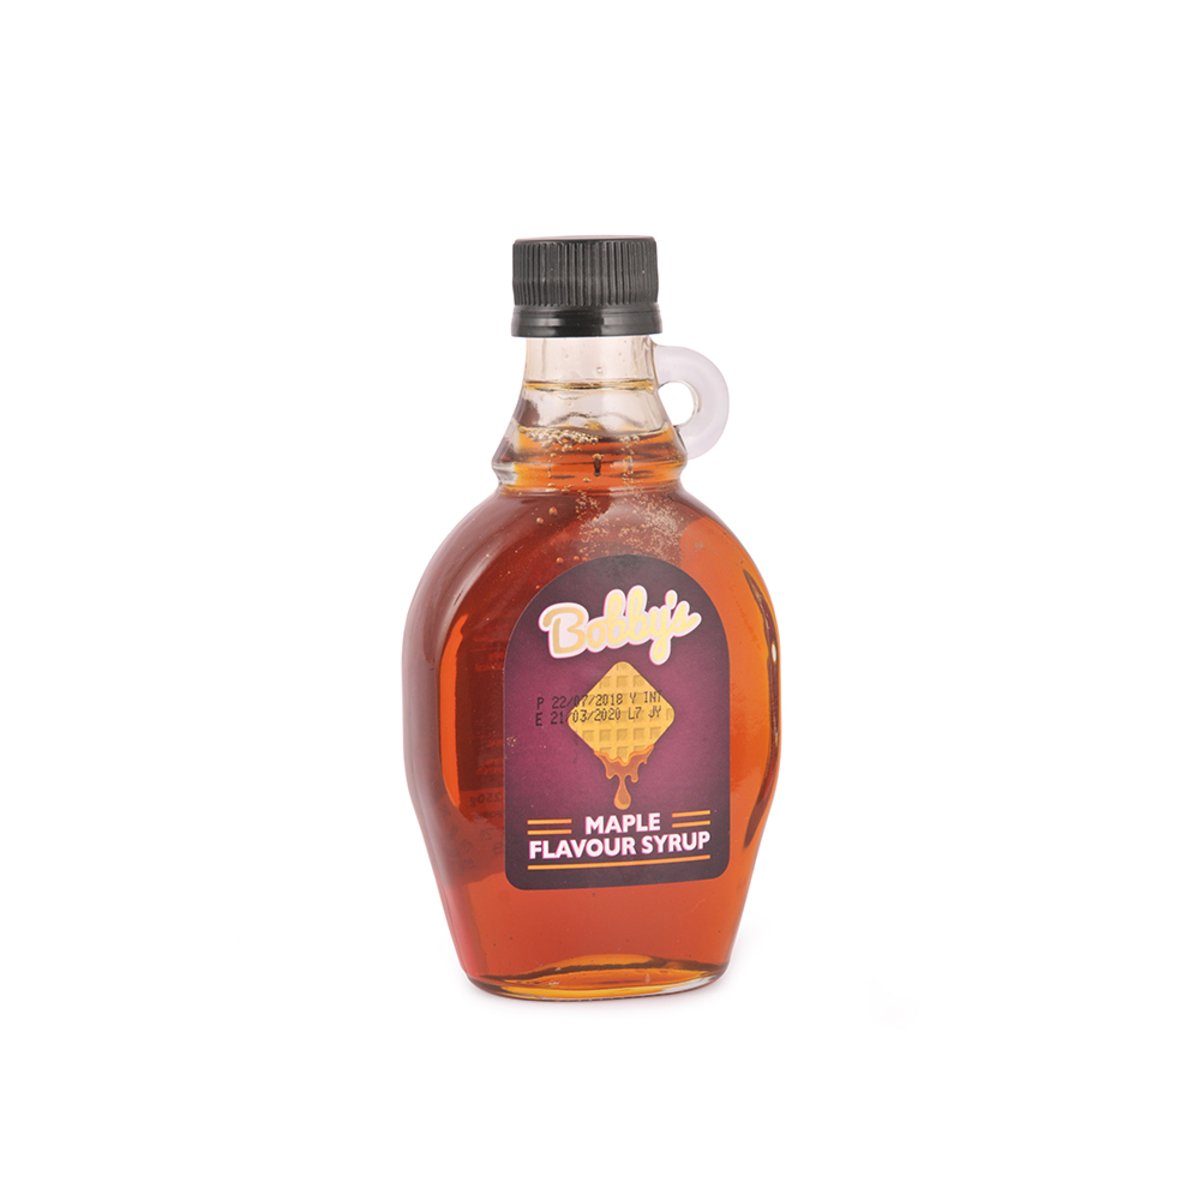 Bobby's Maple Flavour Syrup 250g